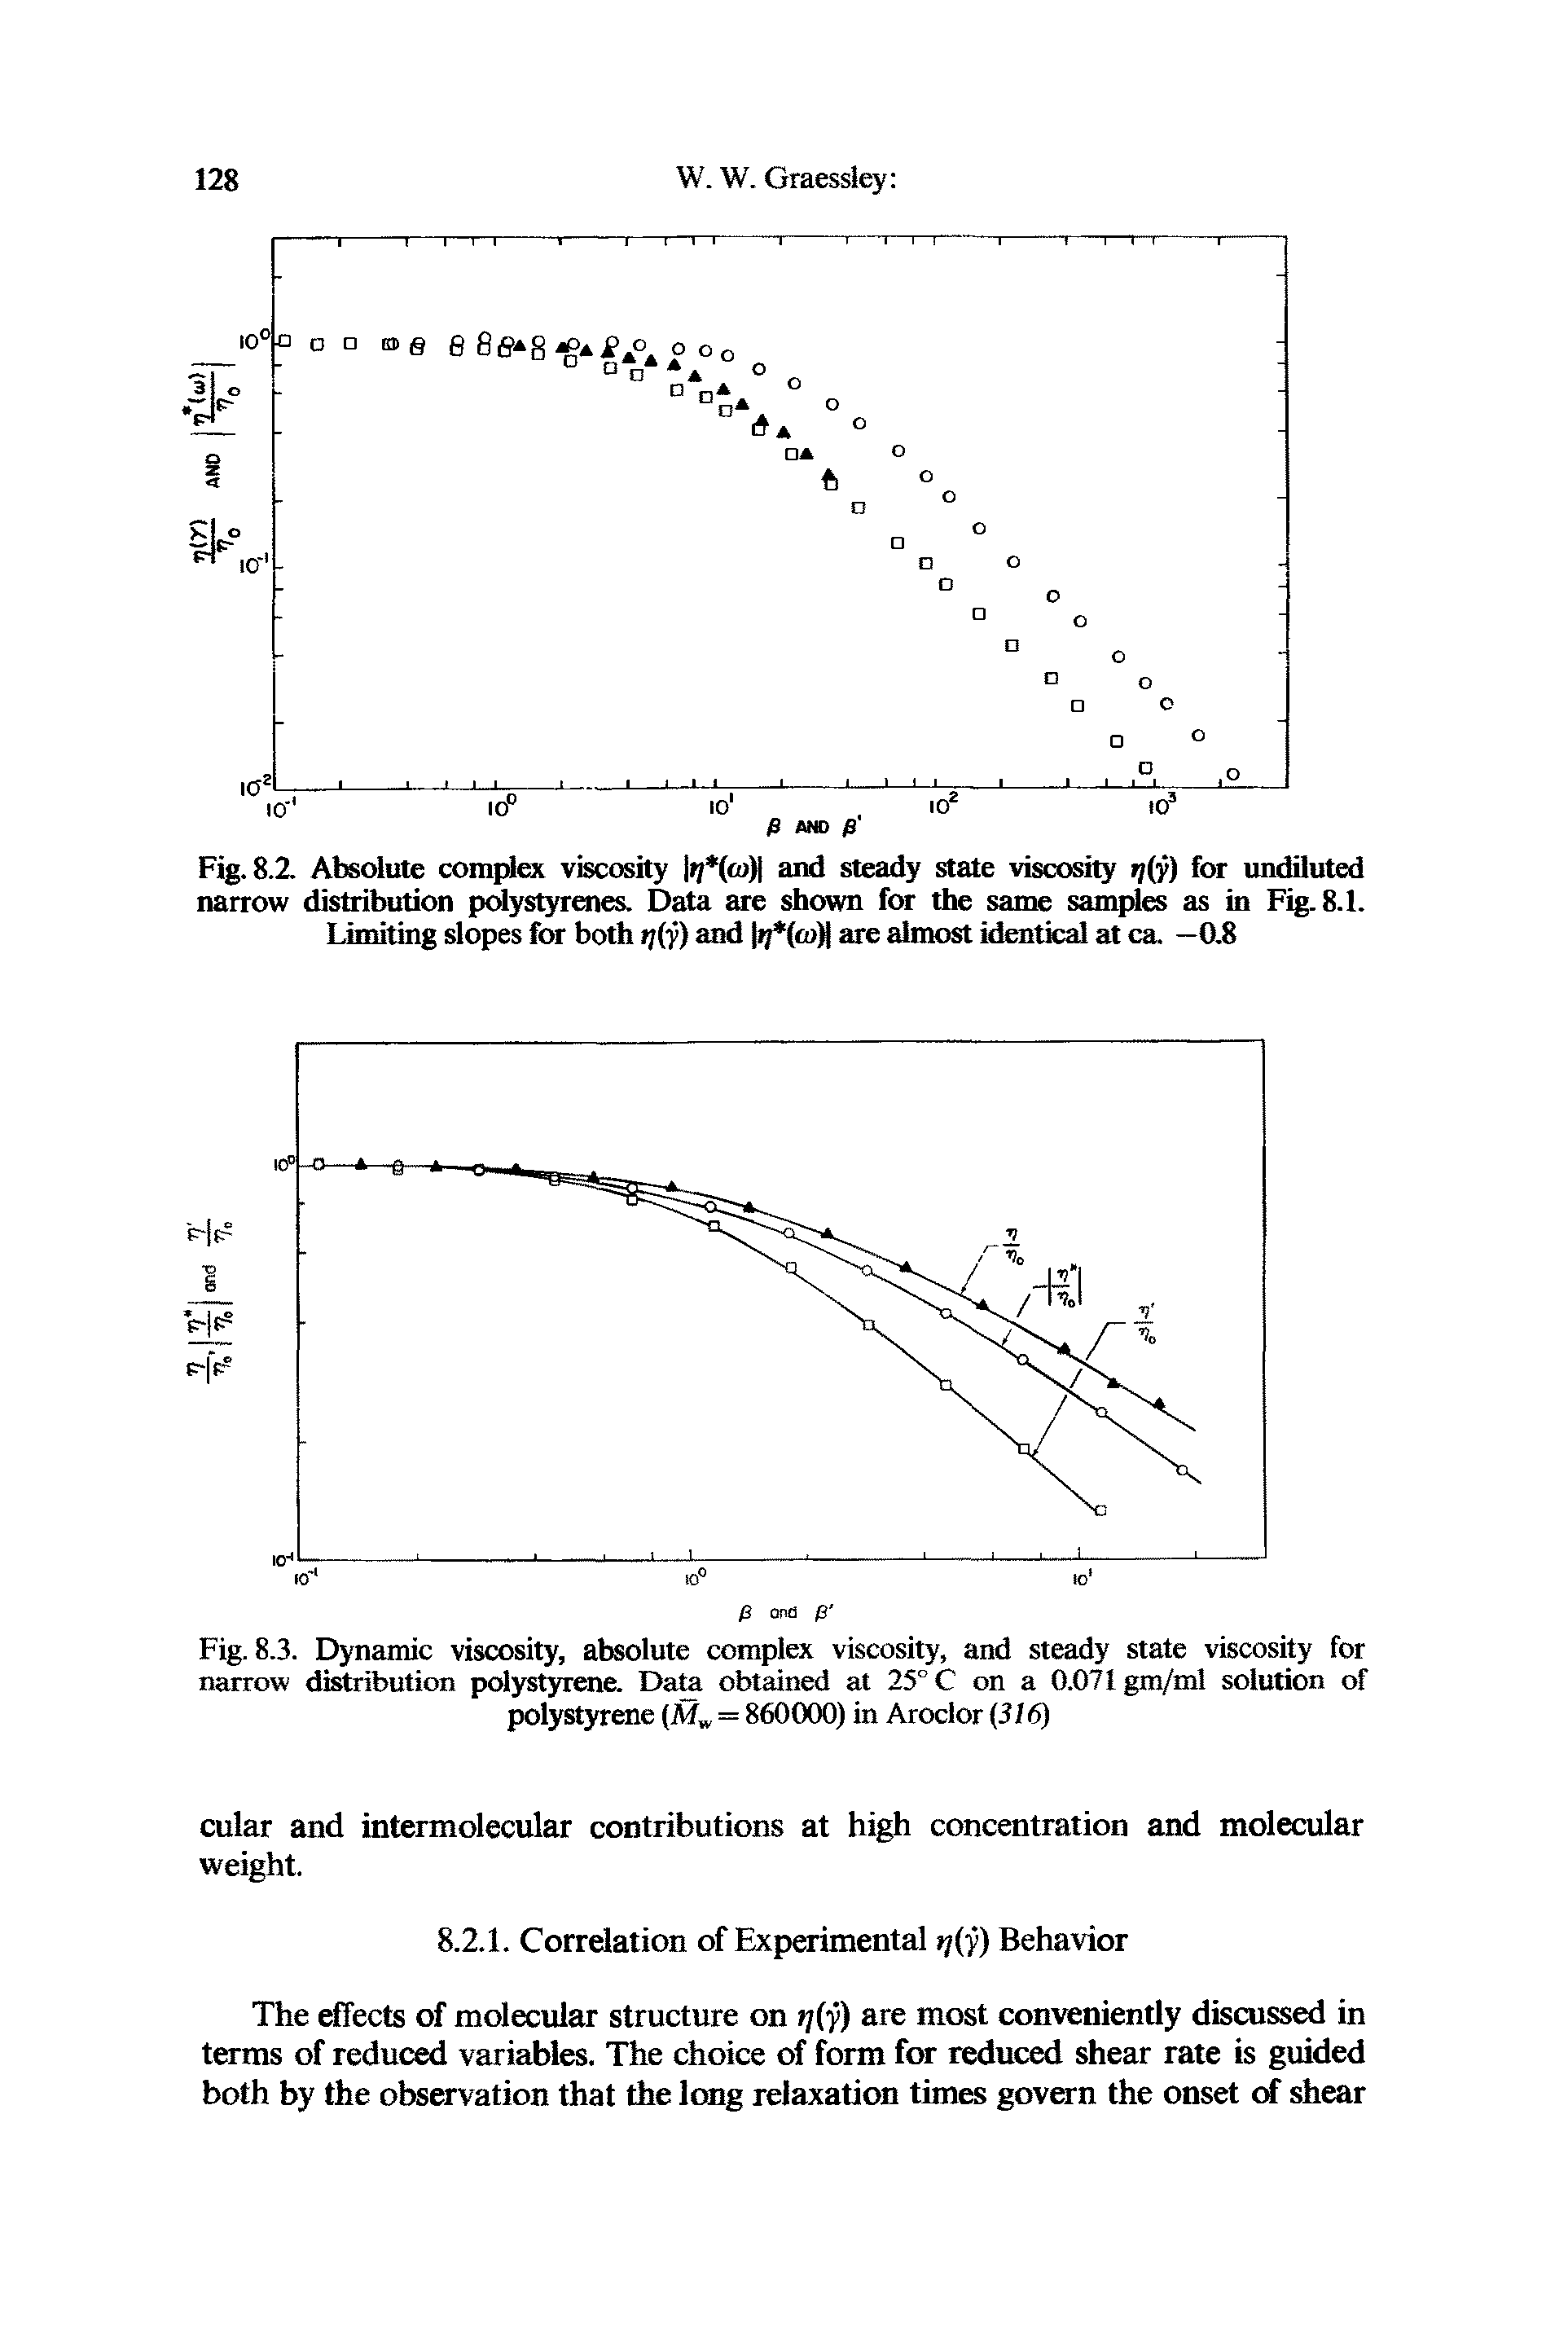 Fig. 8.2 Absolute complex viscosity / (<u) and steady state viscosity r](y) for undiluted narrow distribution polystyrenes. Data are shown for the same samples as in Fig. 8.1. Limiting slopes for both tj(y) and (cu) are almost identical at ca. —0.8...